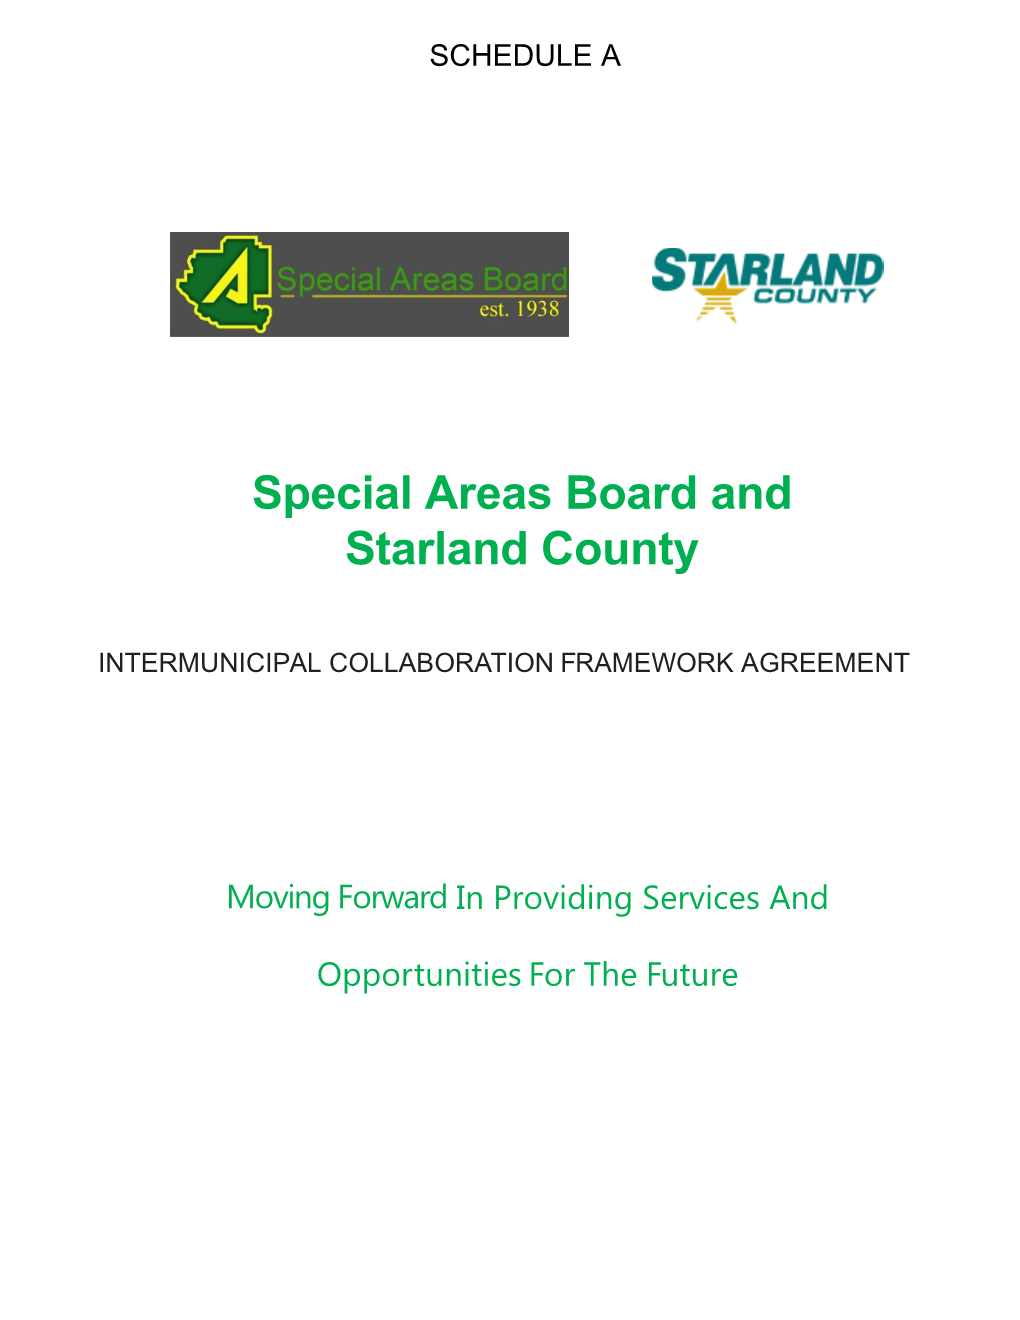 Special Areas Board and Starland County